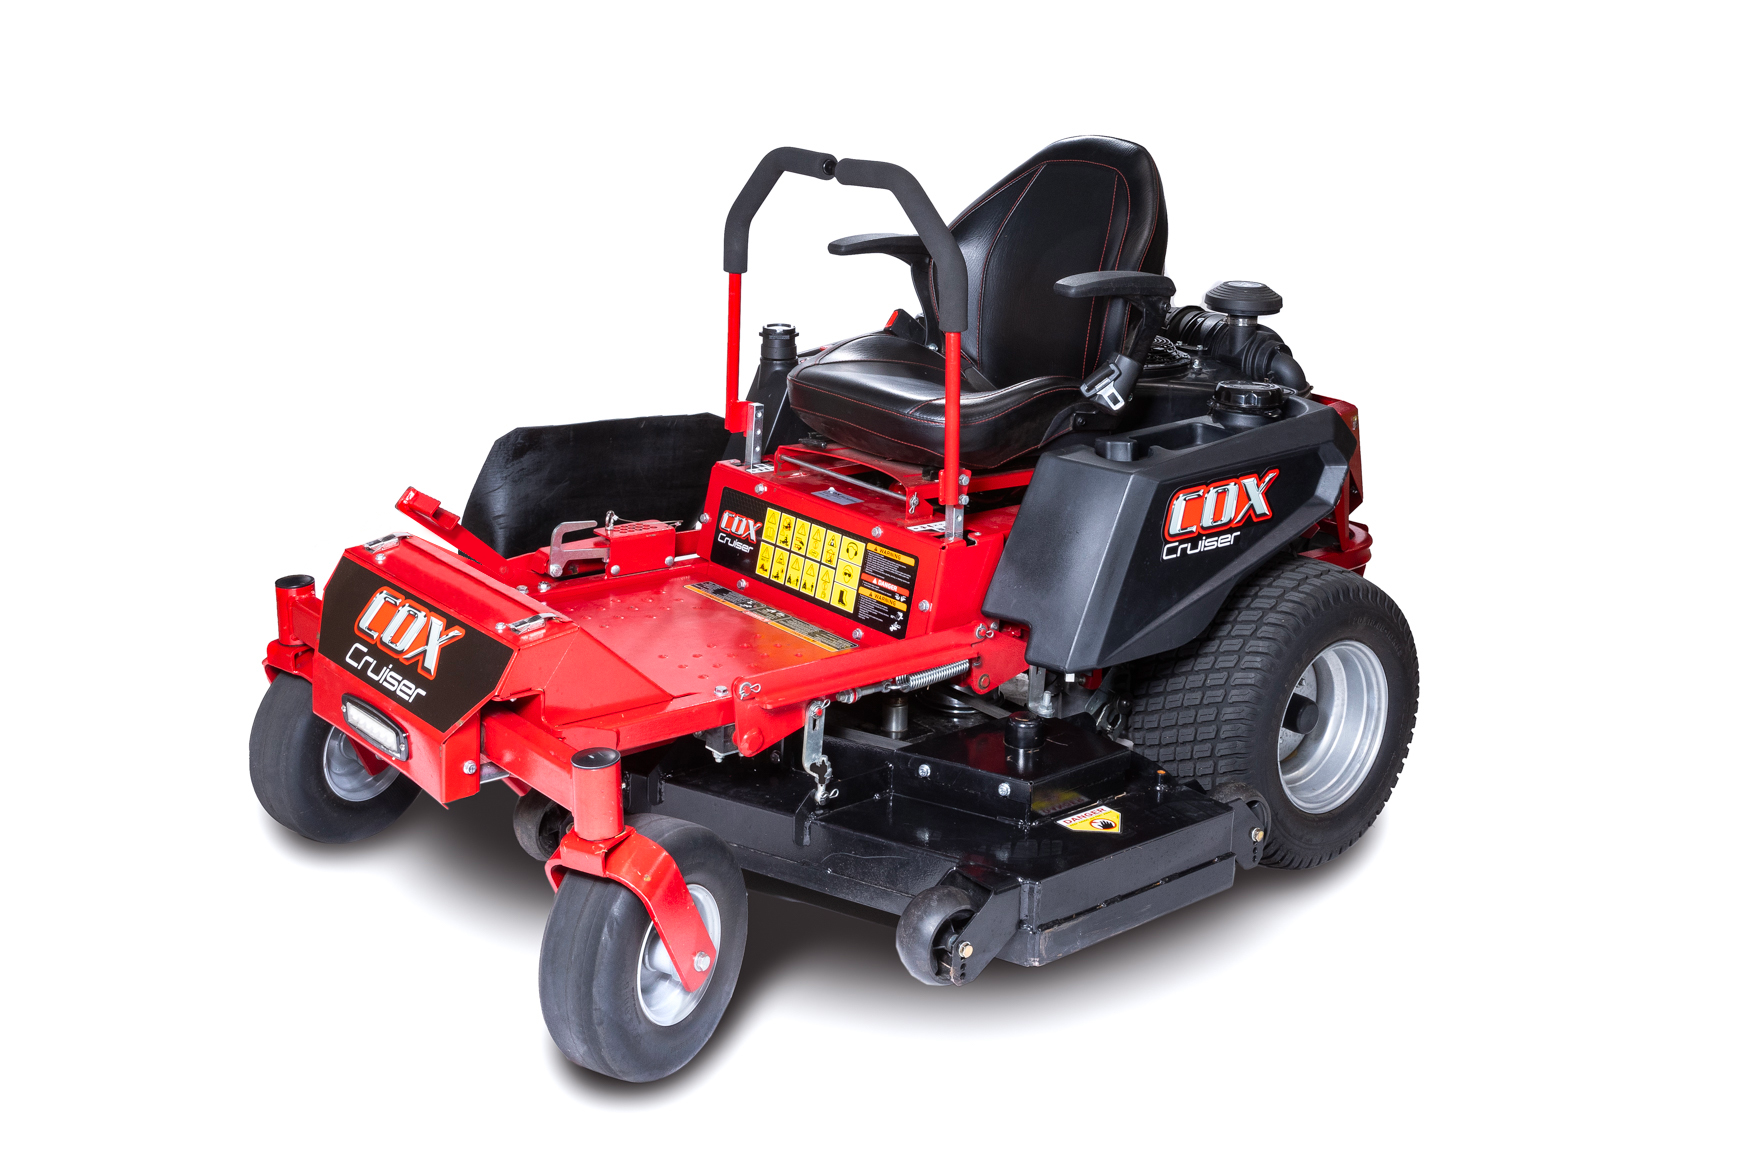 COX Mowers front on product image of a COX Cruiser Zero Turn Ride On Mower